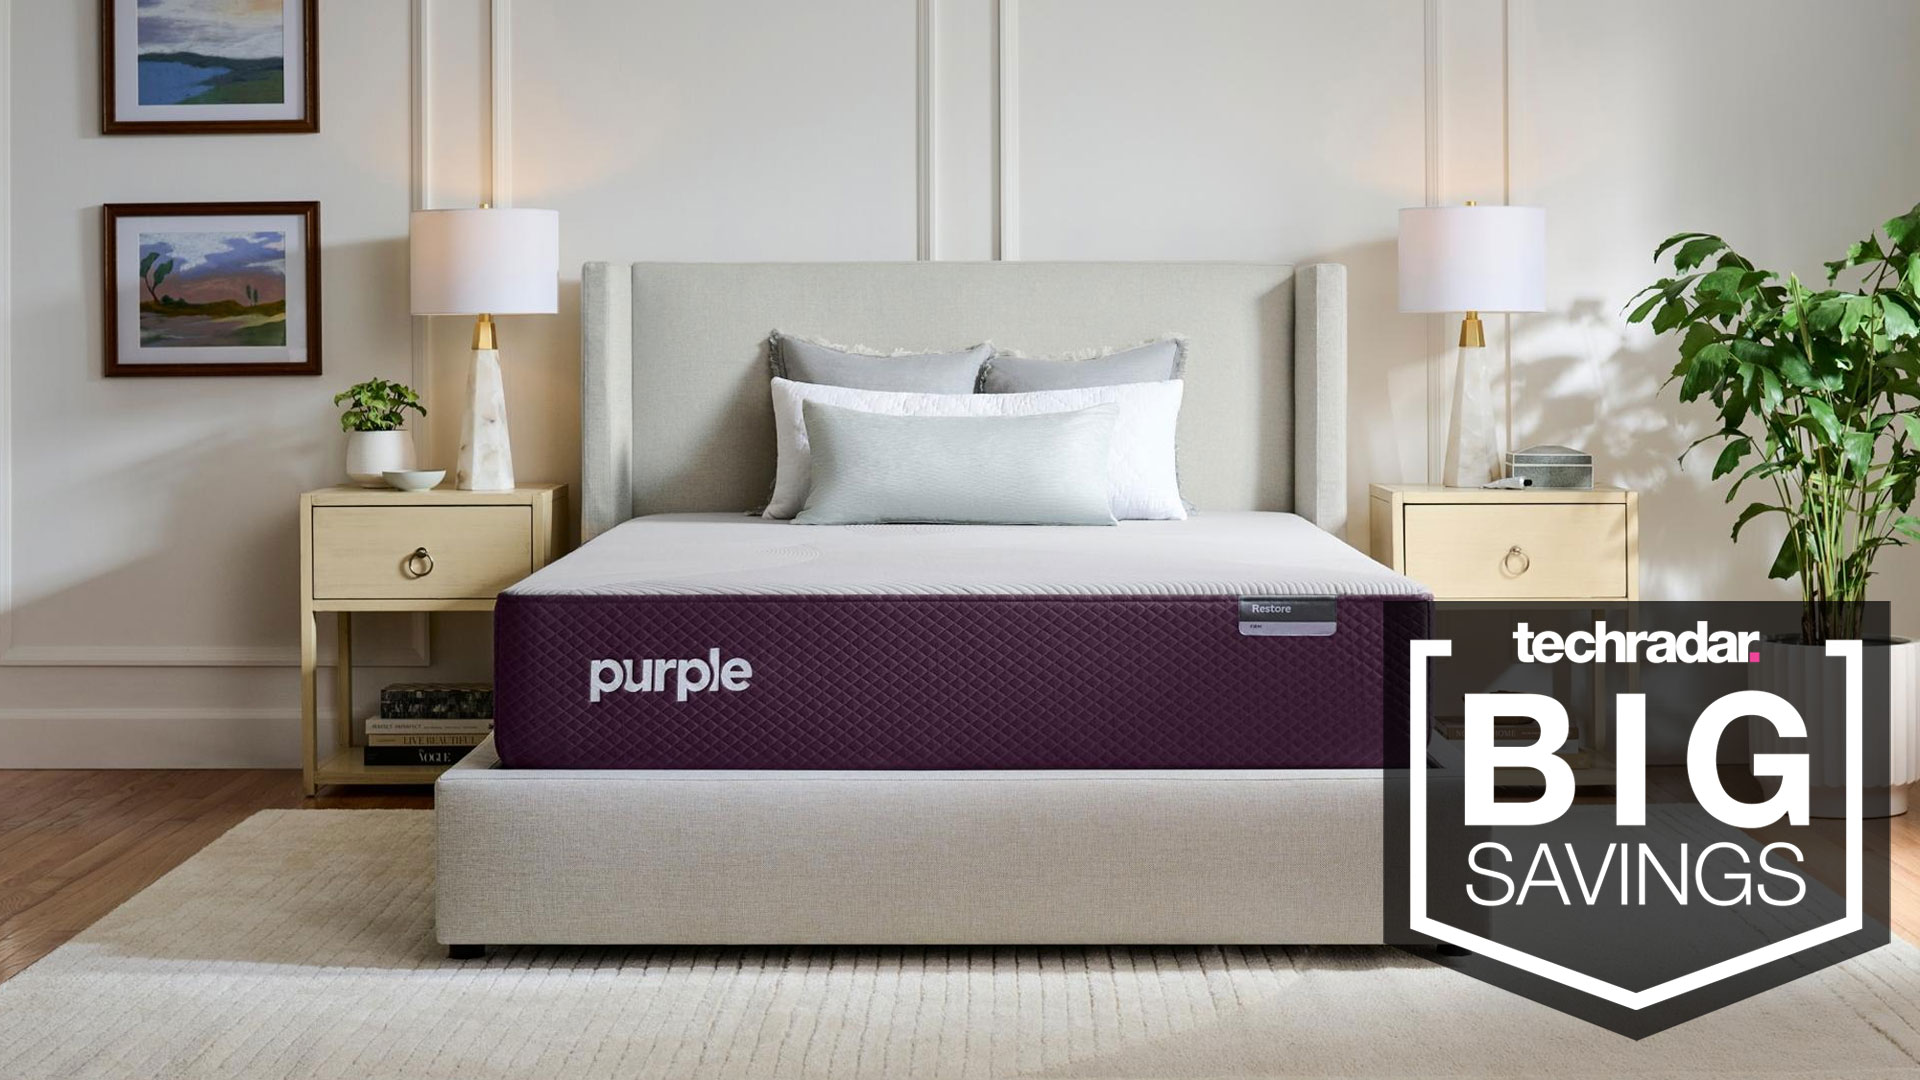 purple mattress chemicals causes cancer